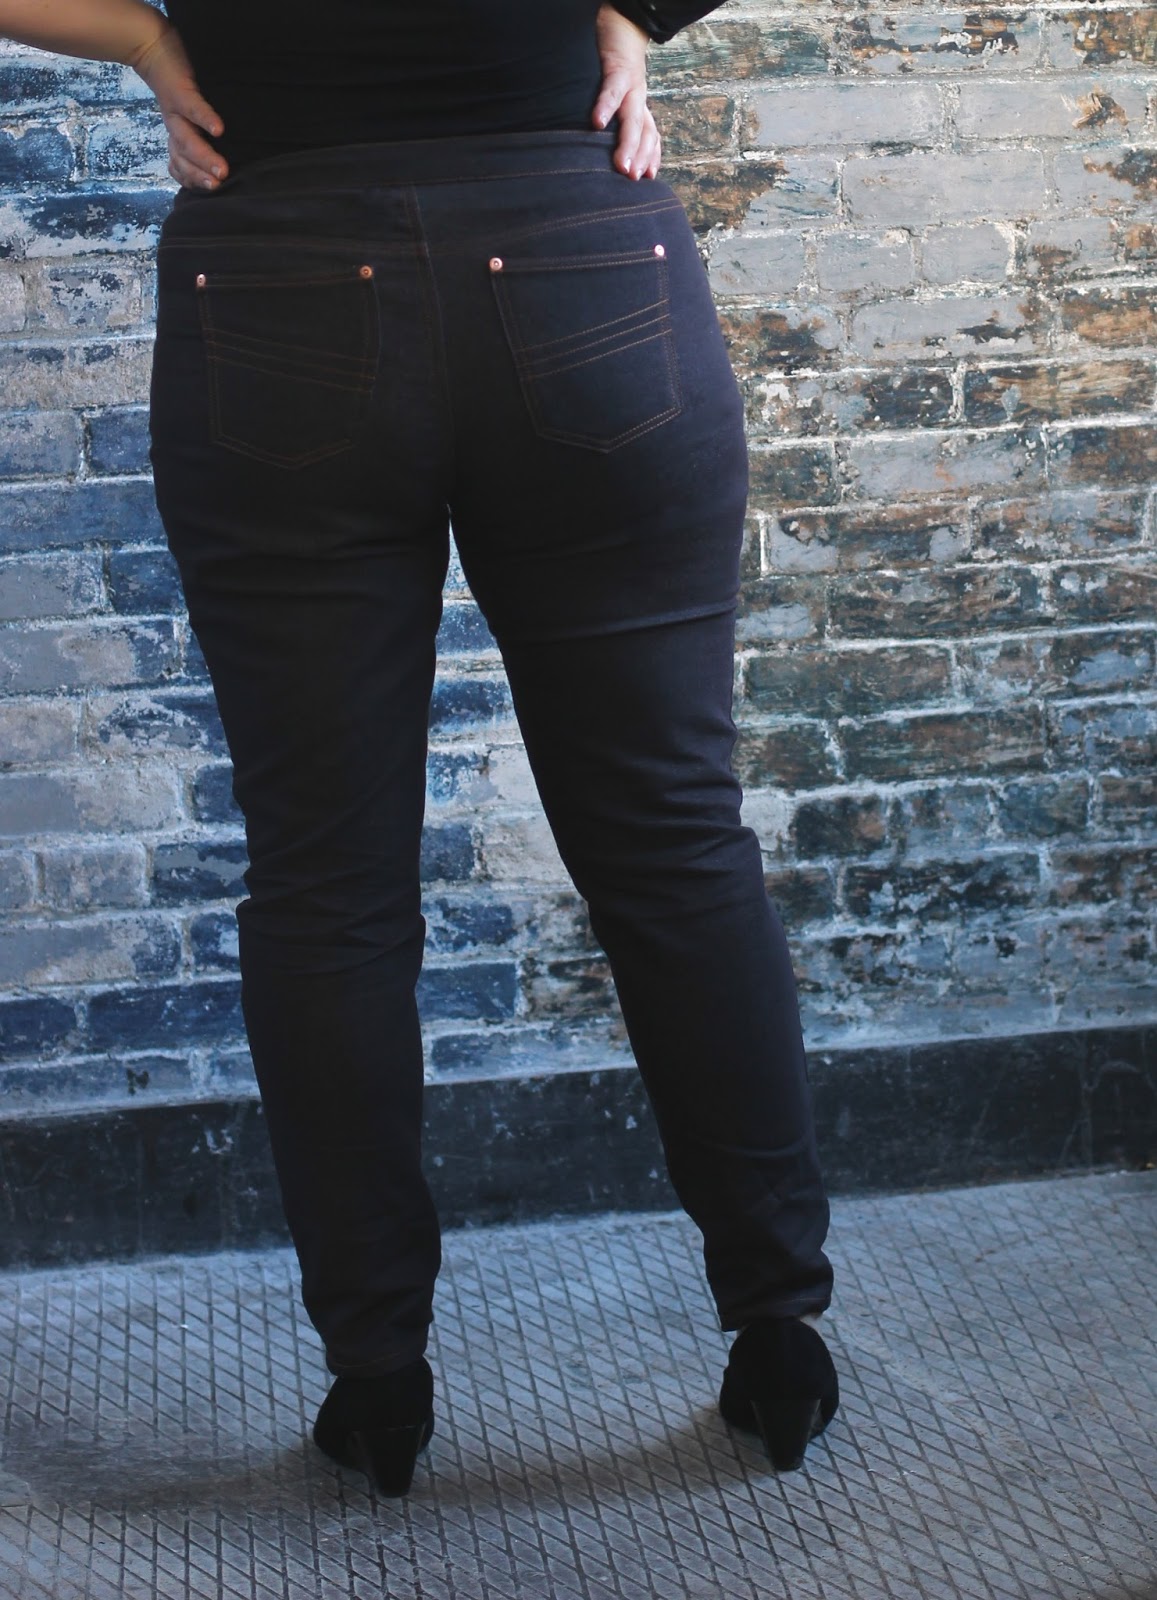 110 Creations: Overly Exhaustive Ginger Jeans Review